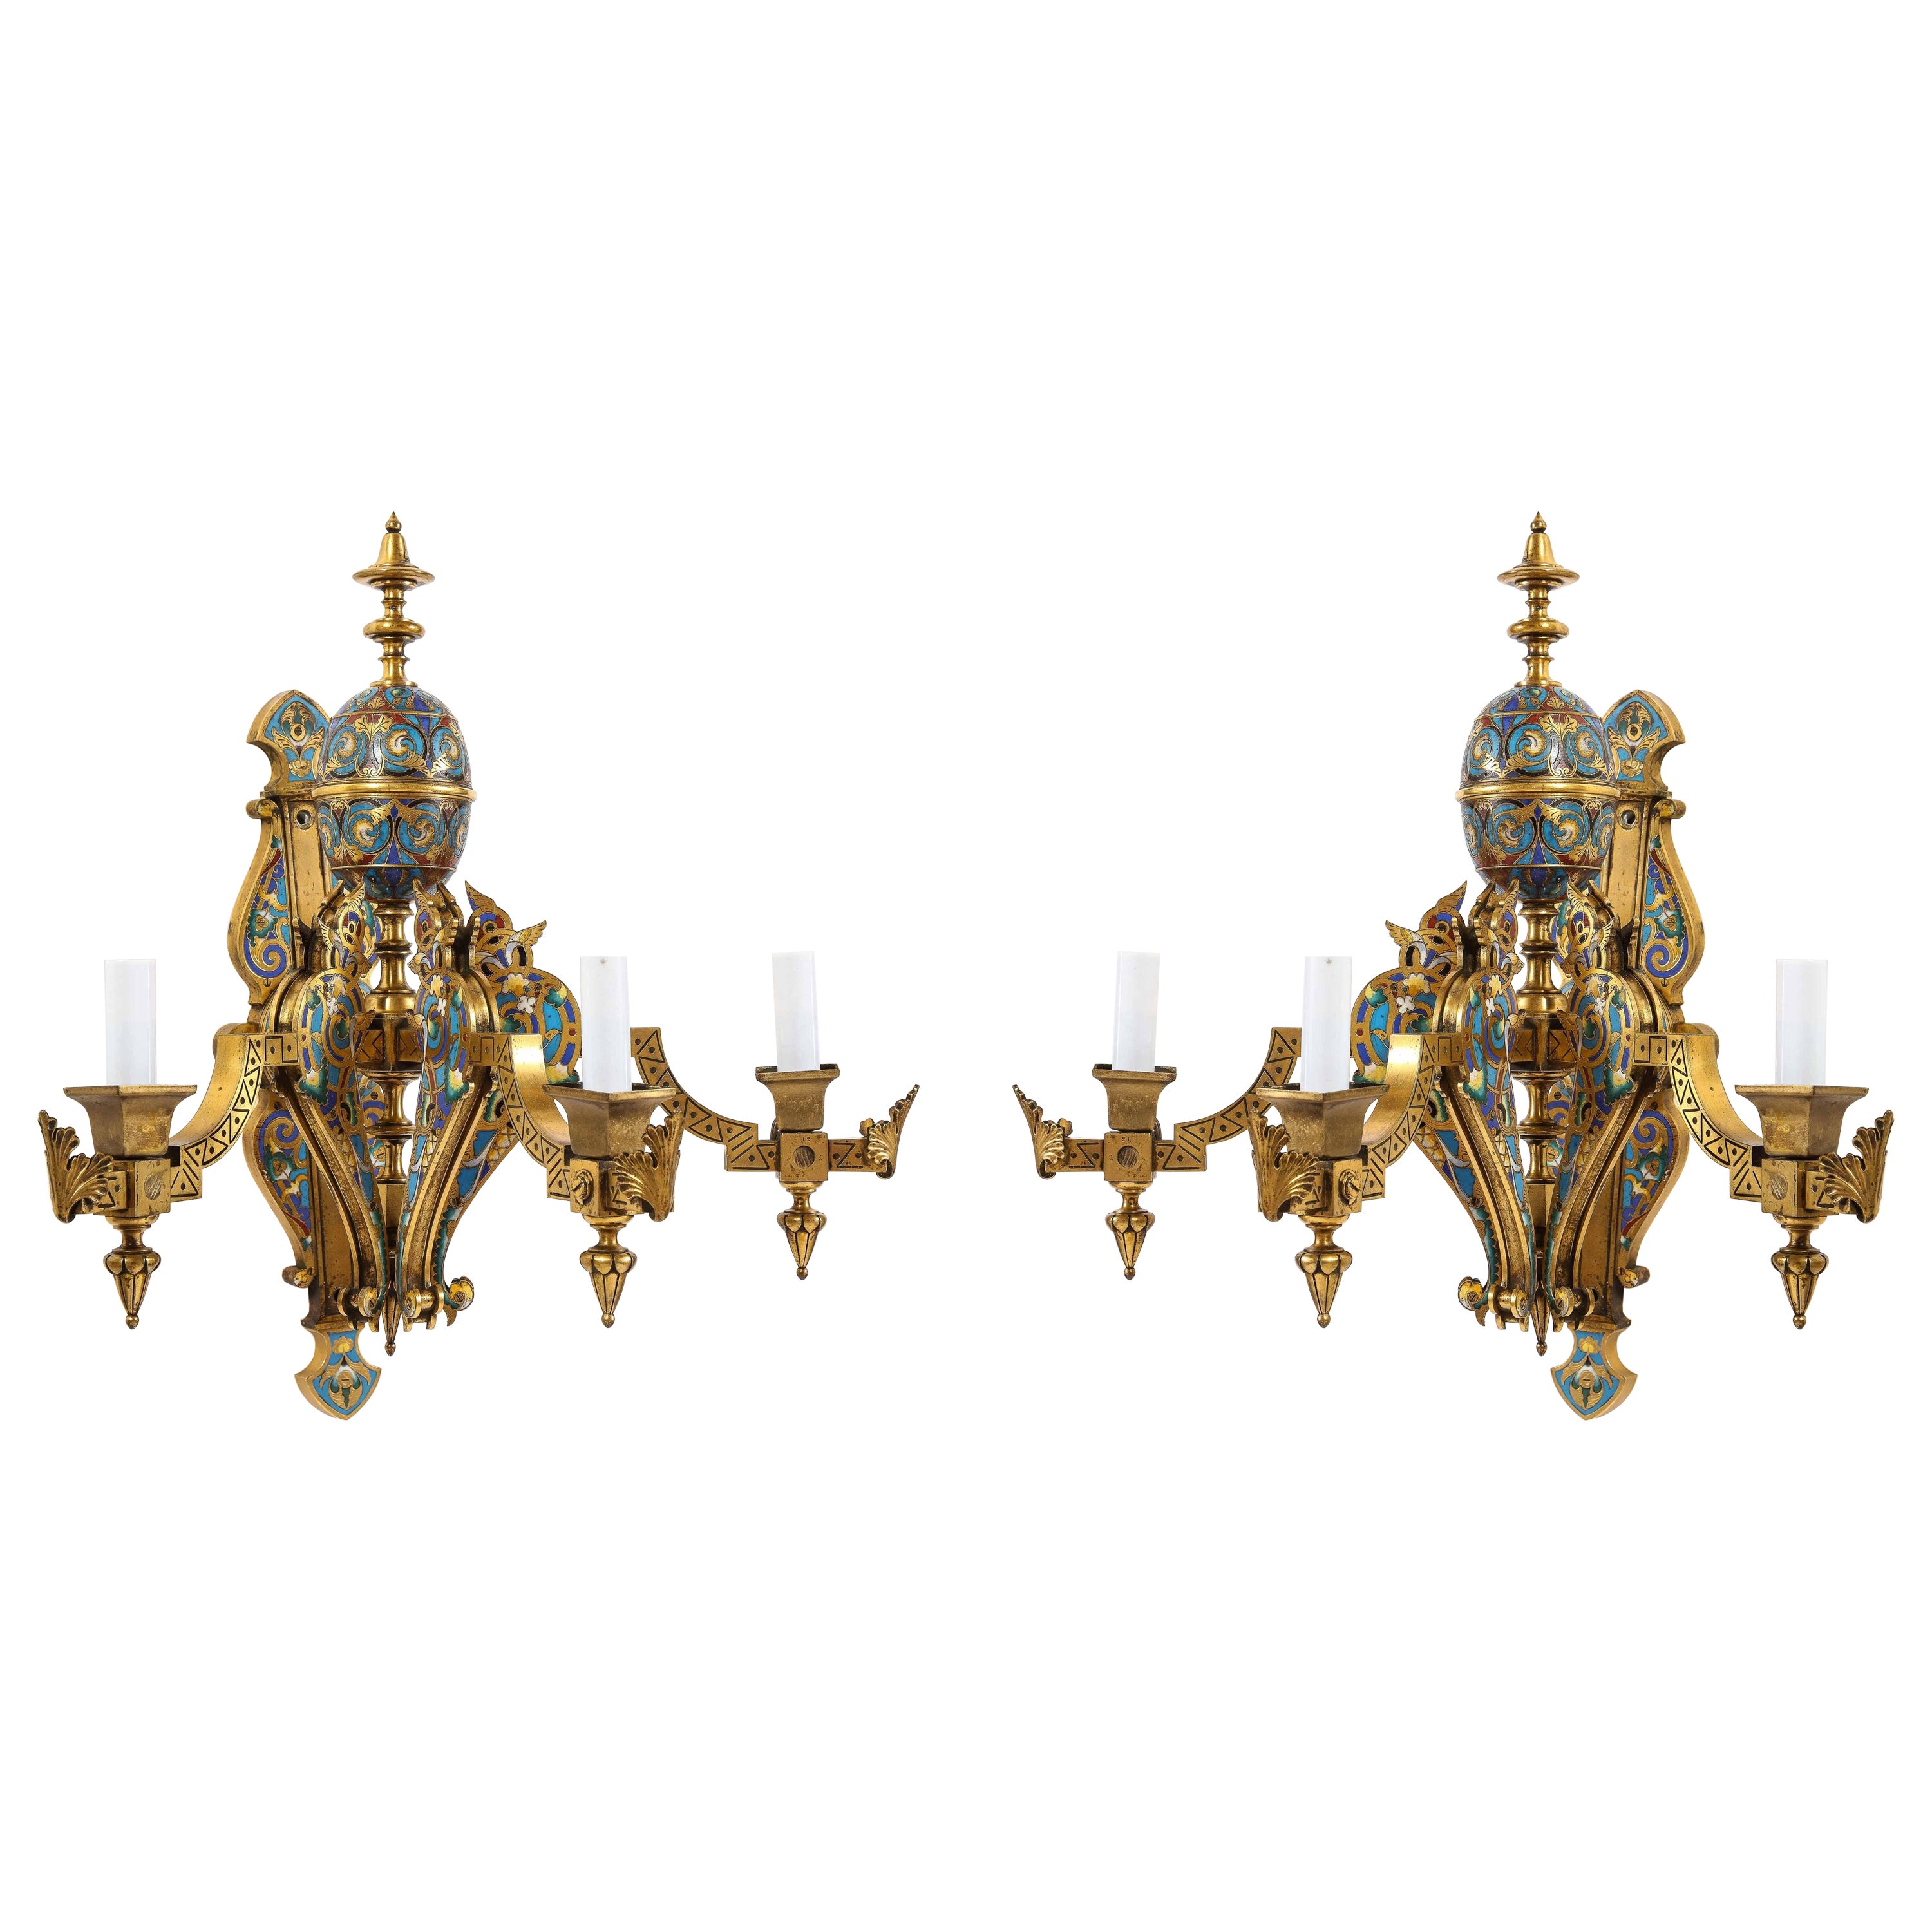 Pair of French Gilt Bronze and Multi-Color Champleve Enamel 3-Arm Wall Sconces